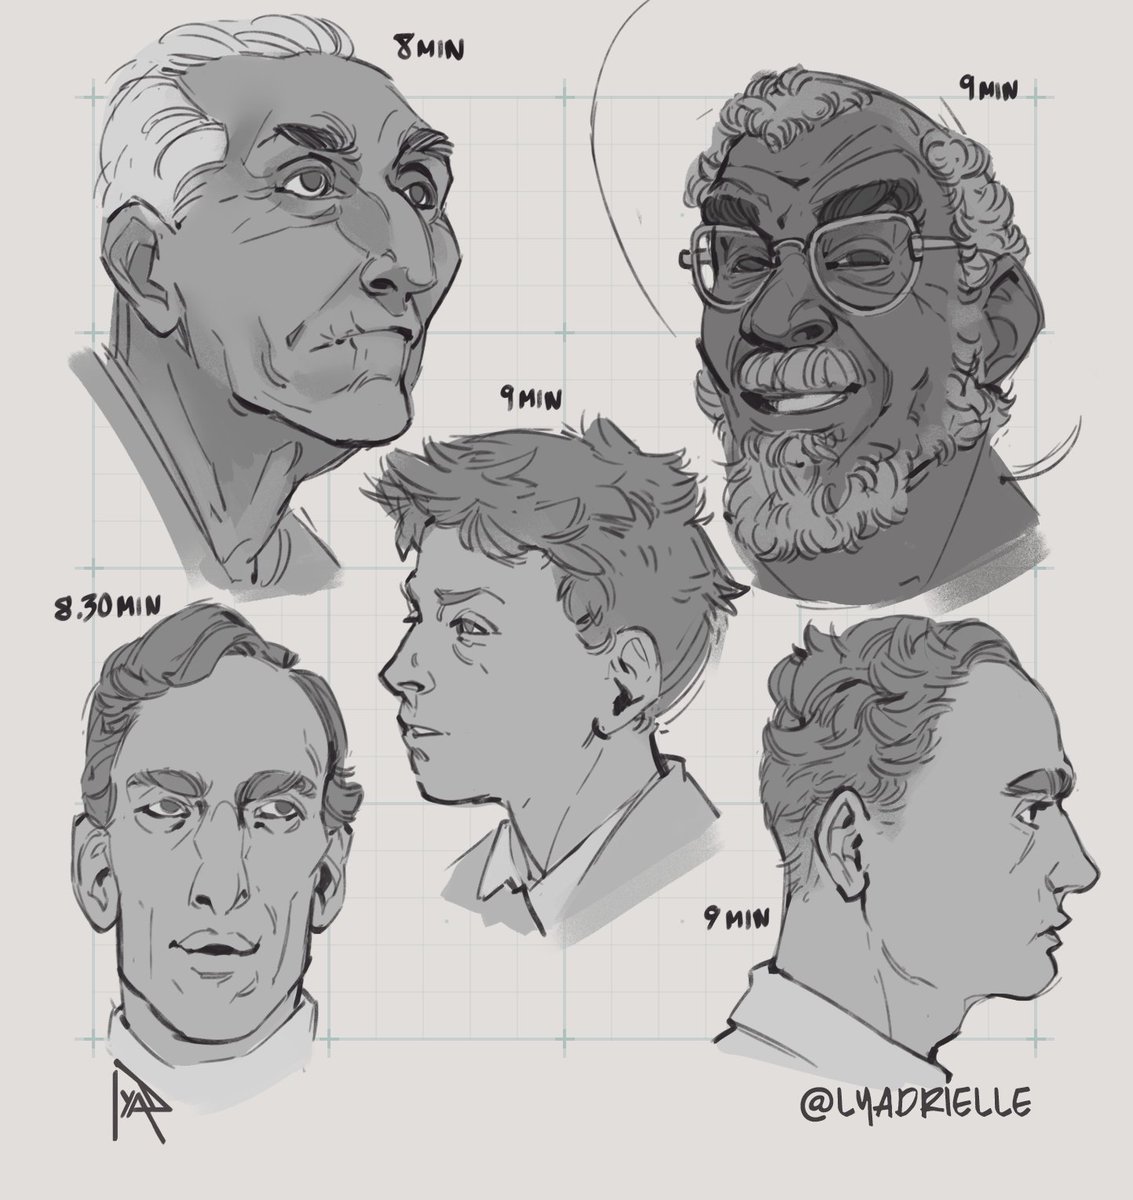 Last one for the portrait #sketches. Gonna try something new this week, probably props/objects and colors.